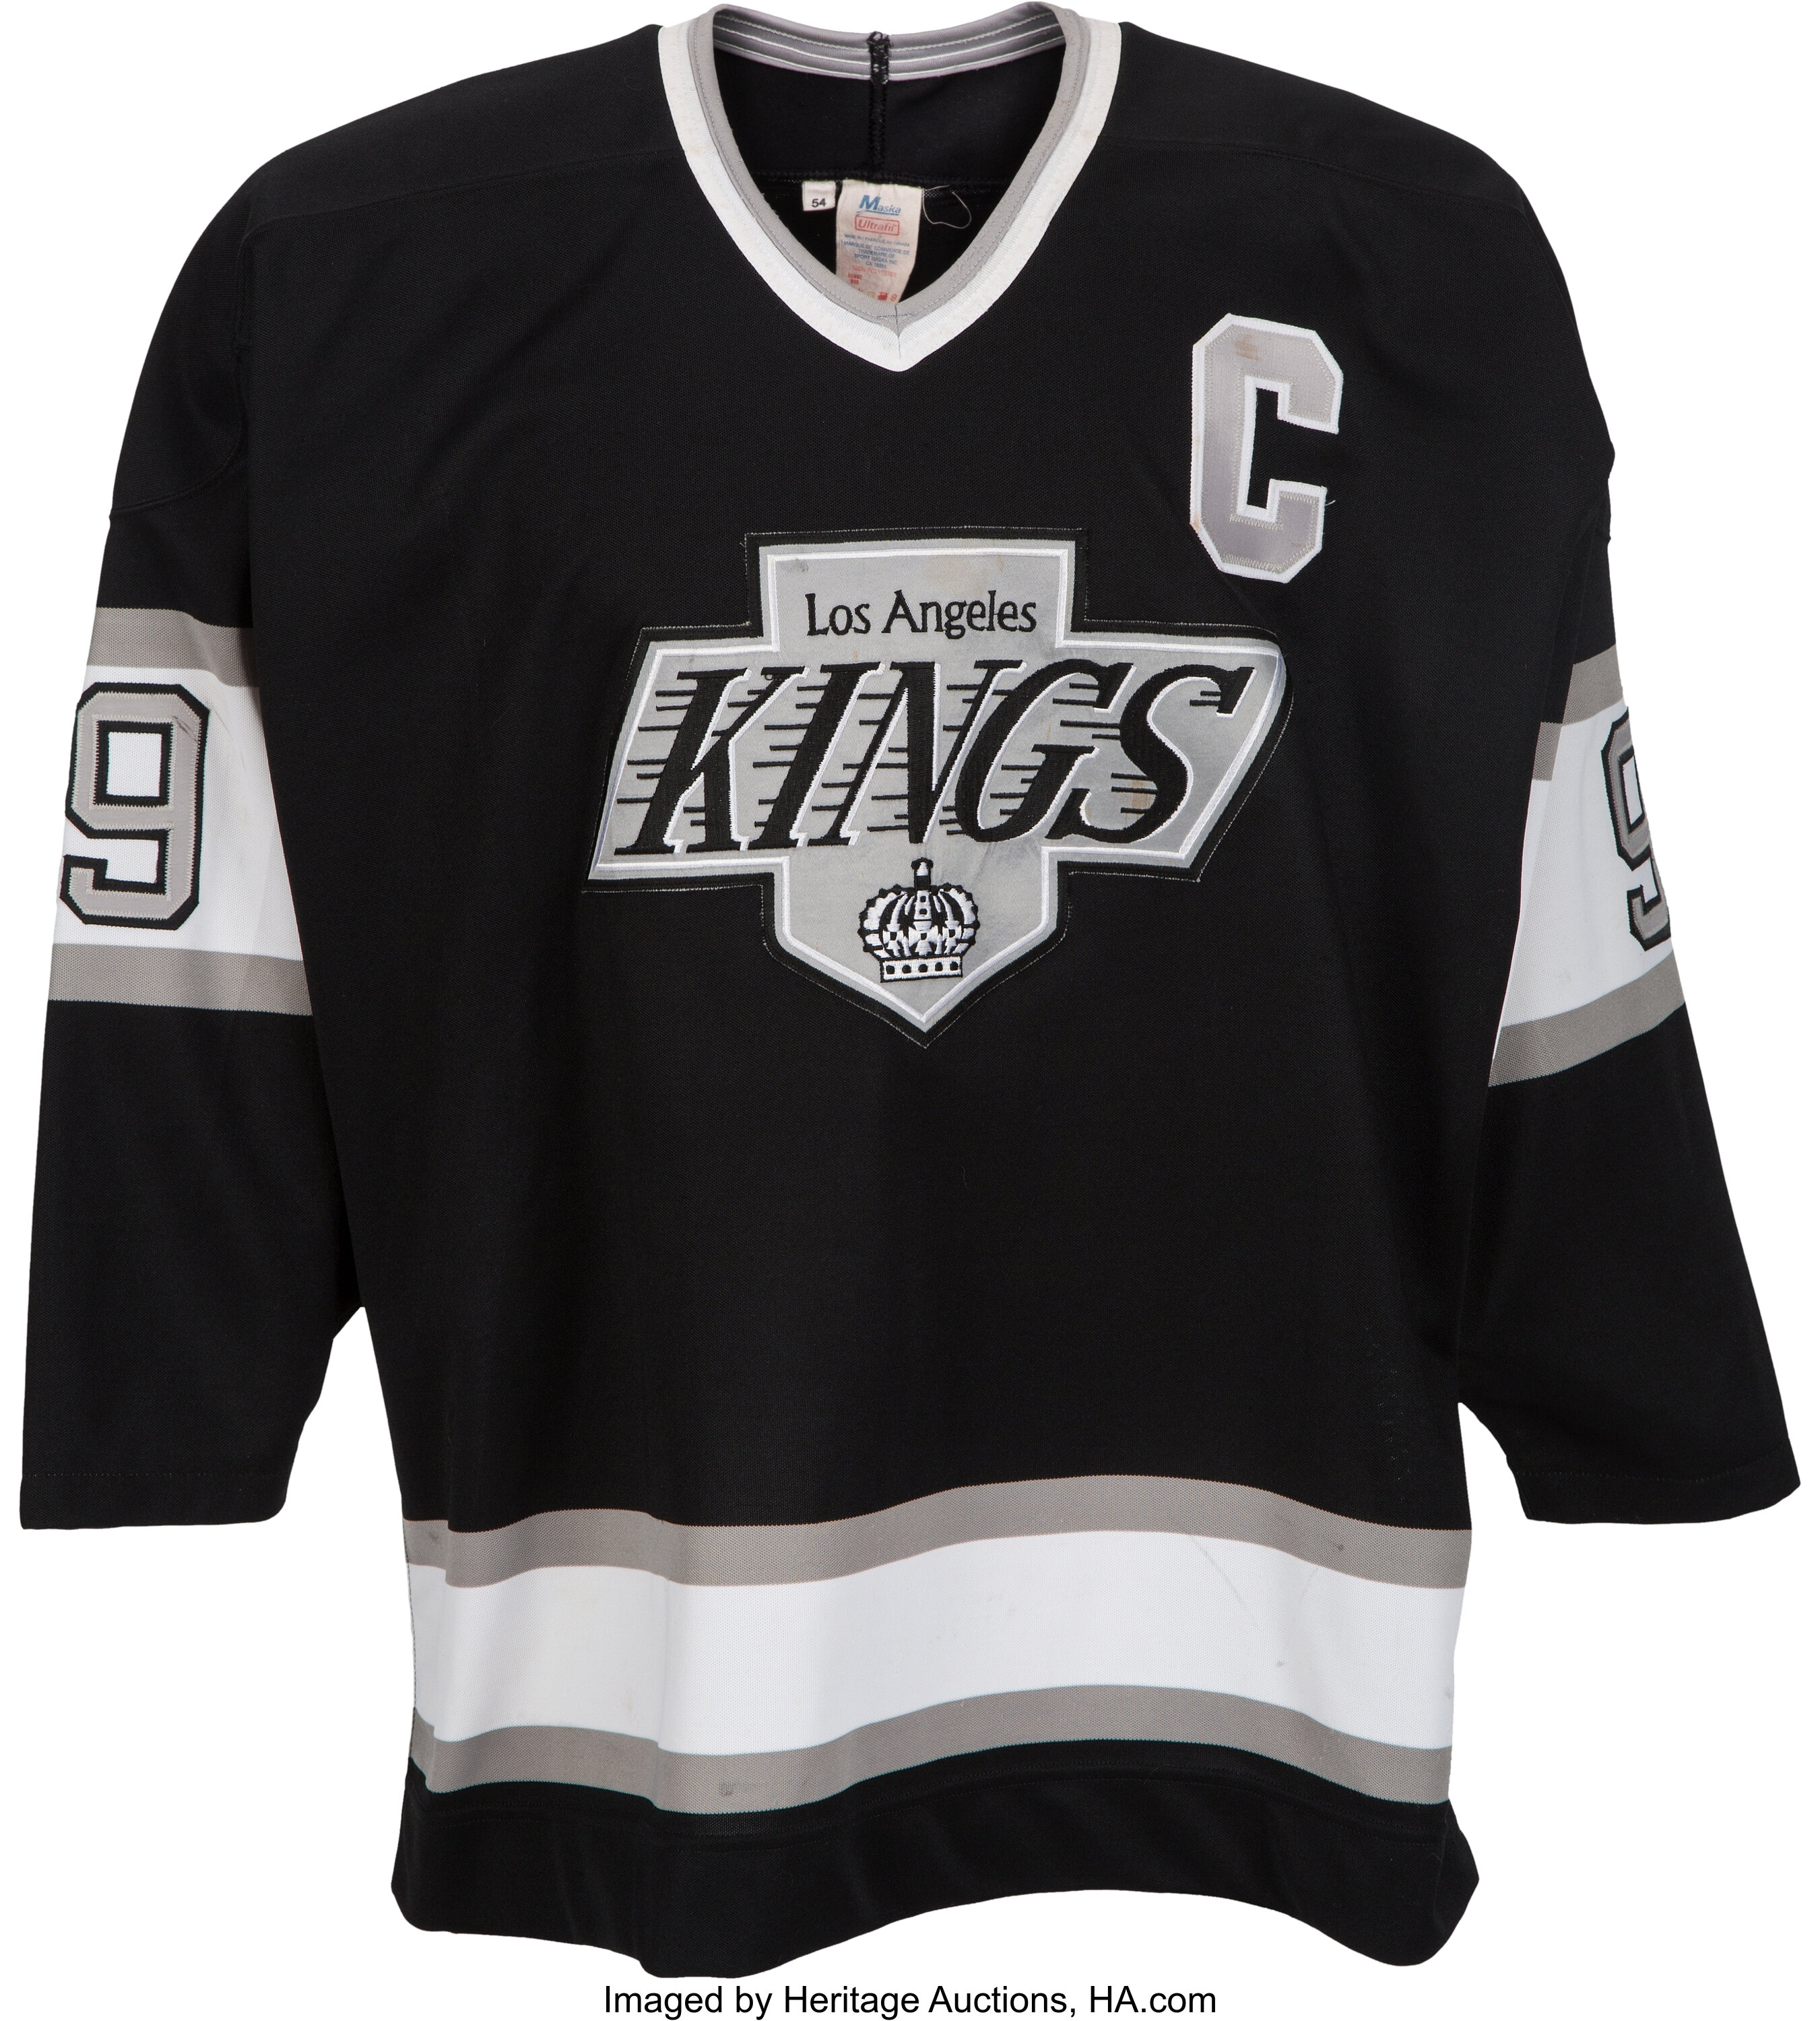 Kings unveil new Gretzky Era-inspired alternate jersey – Daily News